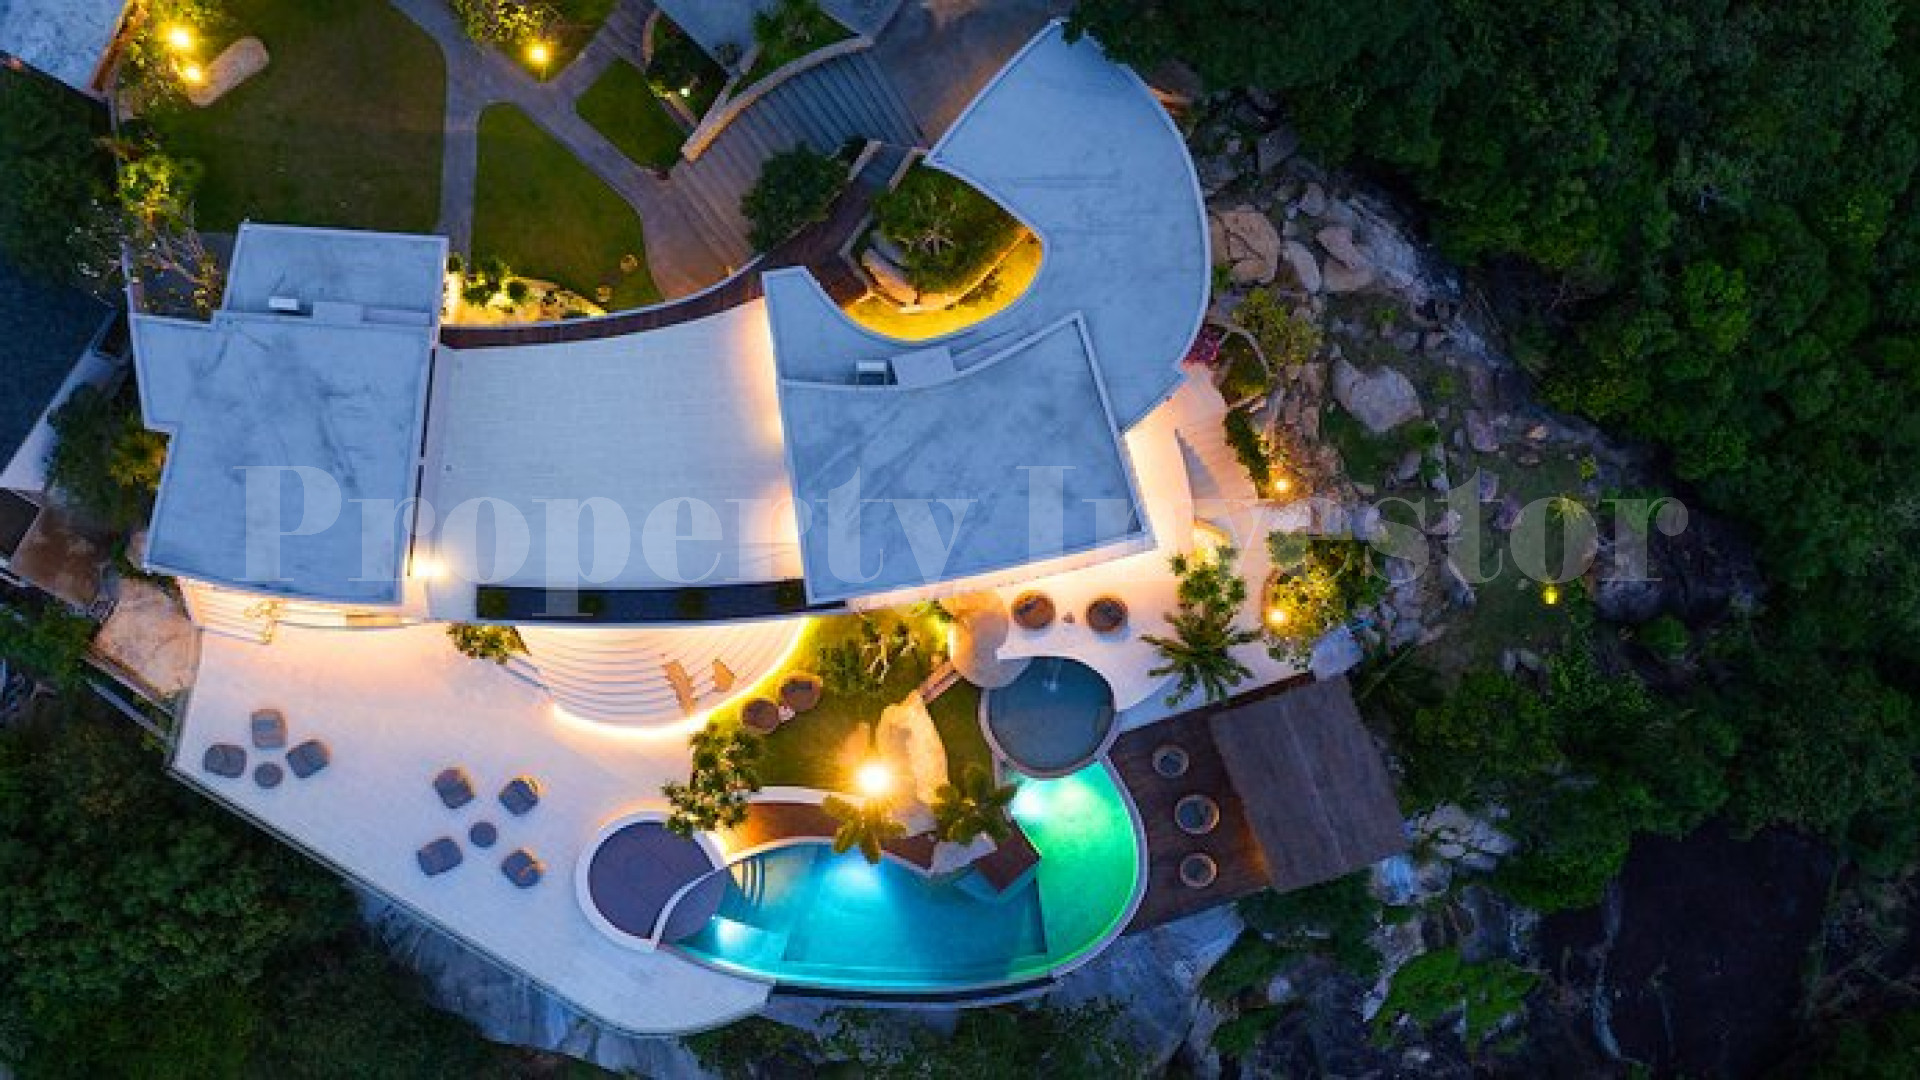 Spectacular 5 Bedroom Ultra-Luxury Seaview Villa with 360° Views for Sale on Chaweng Noi Peak, Koh Samui